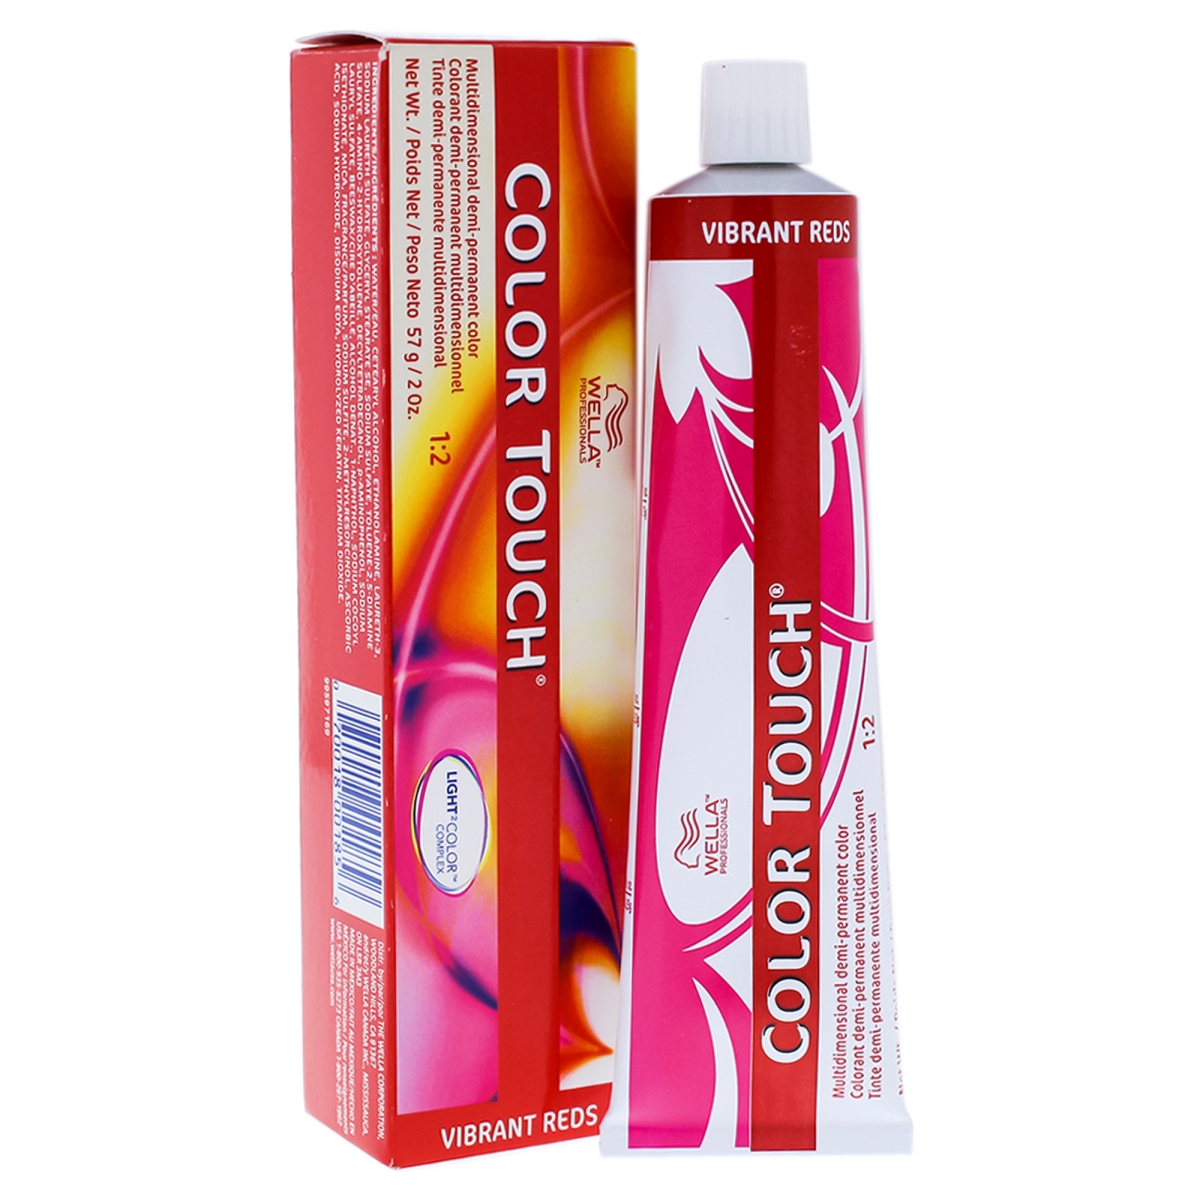 I0086475 Color Touch Demi & Permanent Hair Color For Unisex - 4 5 Medium Brown & Red & Violet - 2 Oz